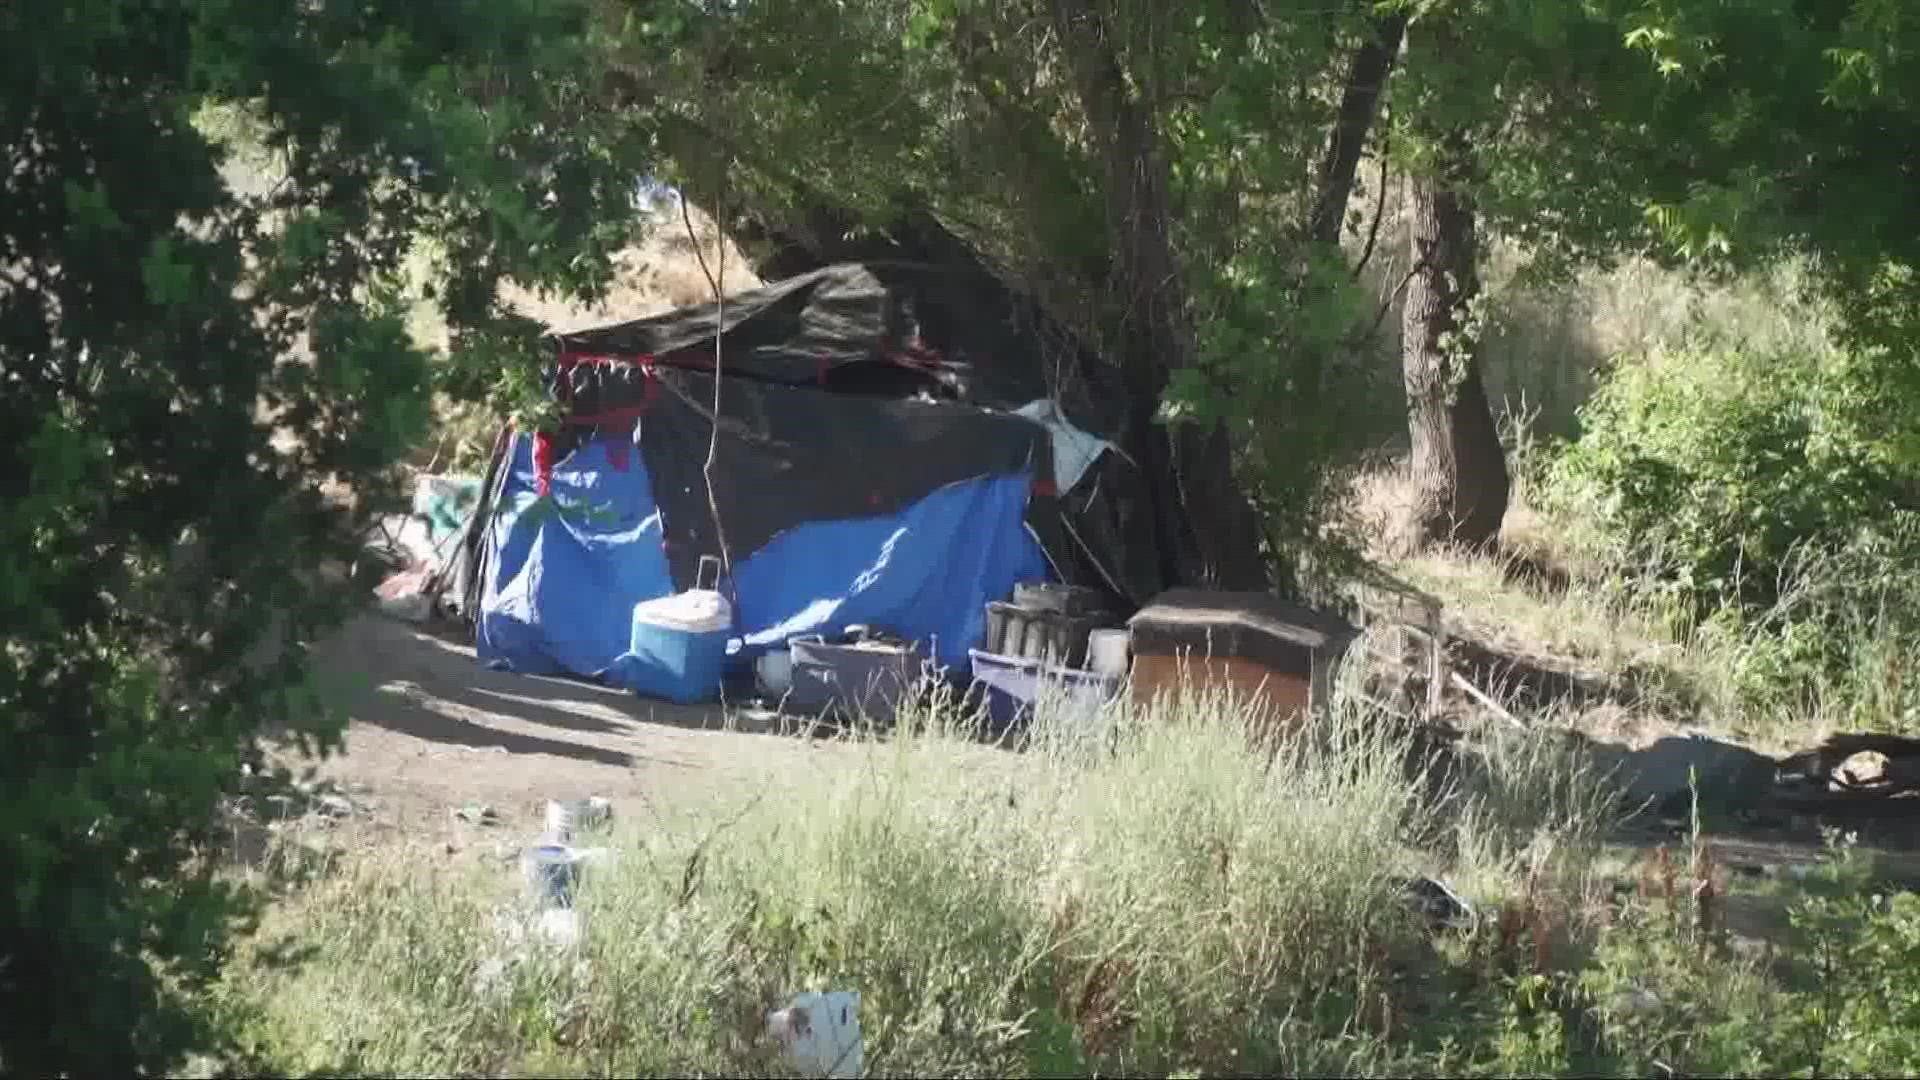 The Sacramento County Board of Supervisors voted unanimously on two anti-camping measures that would allow the policing of some homeless encampments.